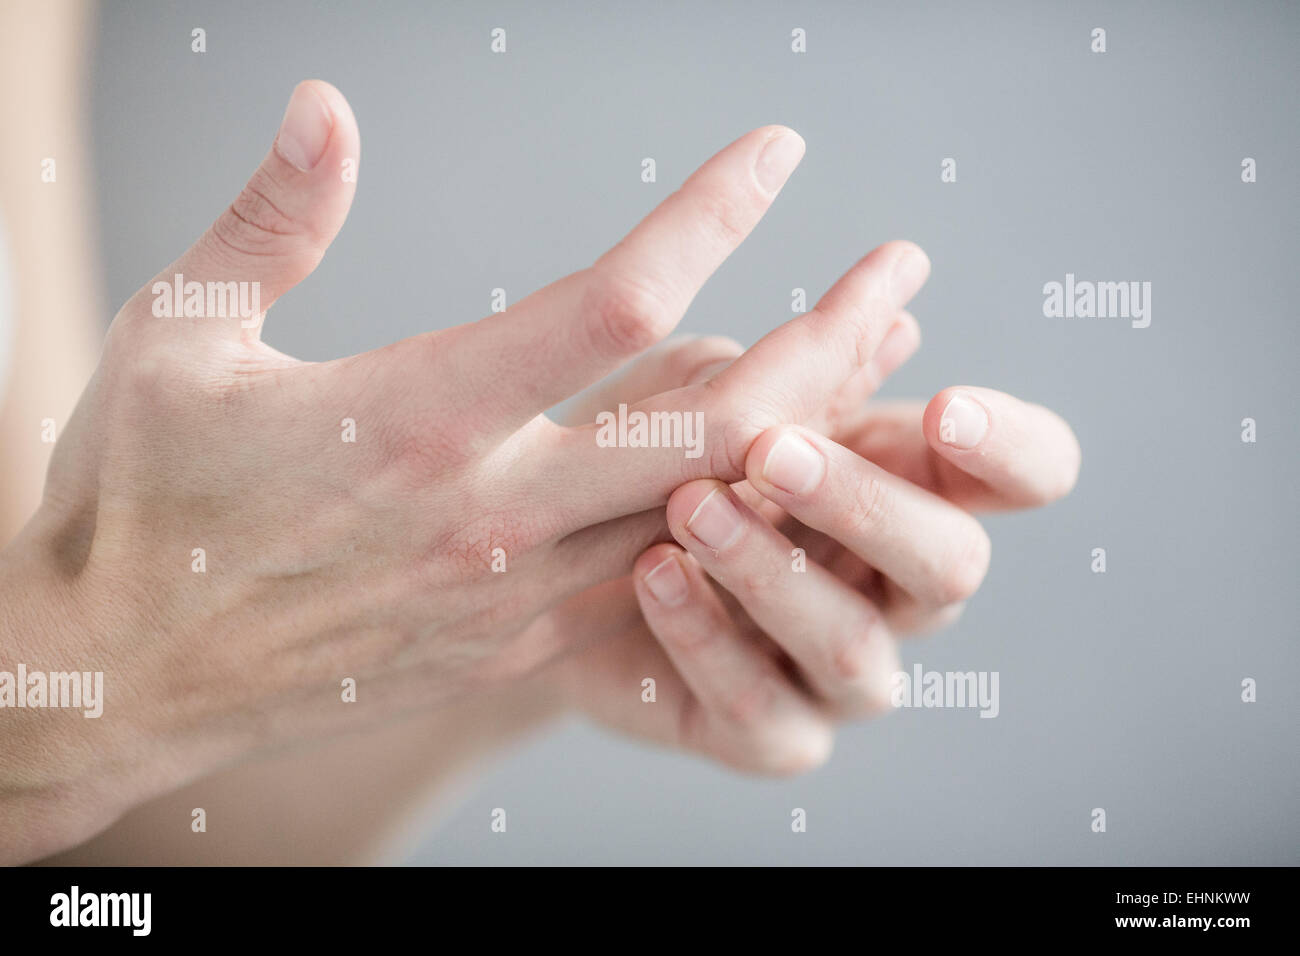 Woman suffering from an articular pain in the hand. Stock Photo